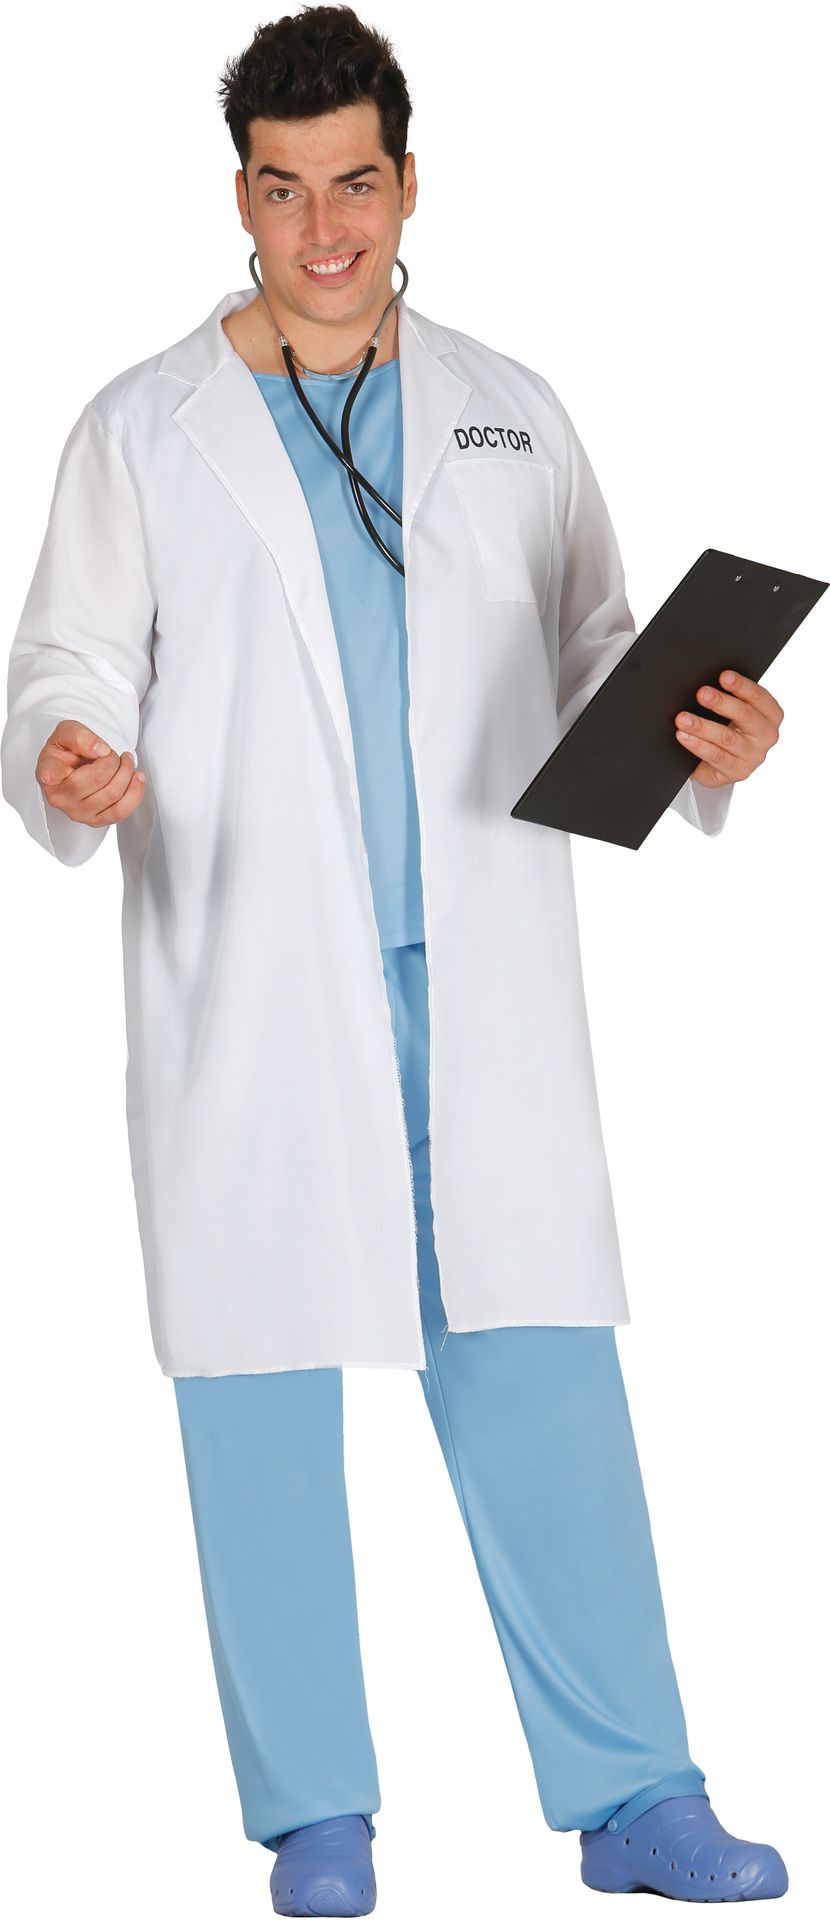 Dokter outfit heren